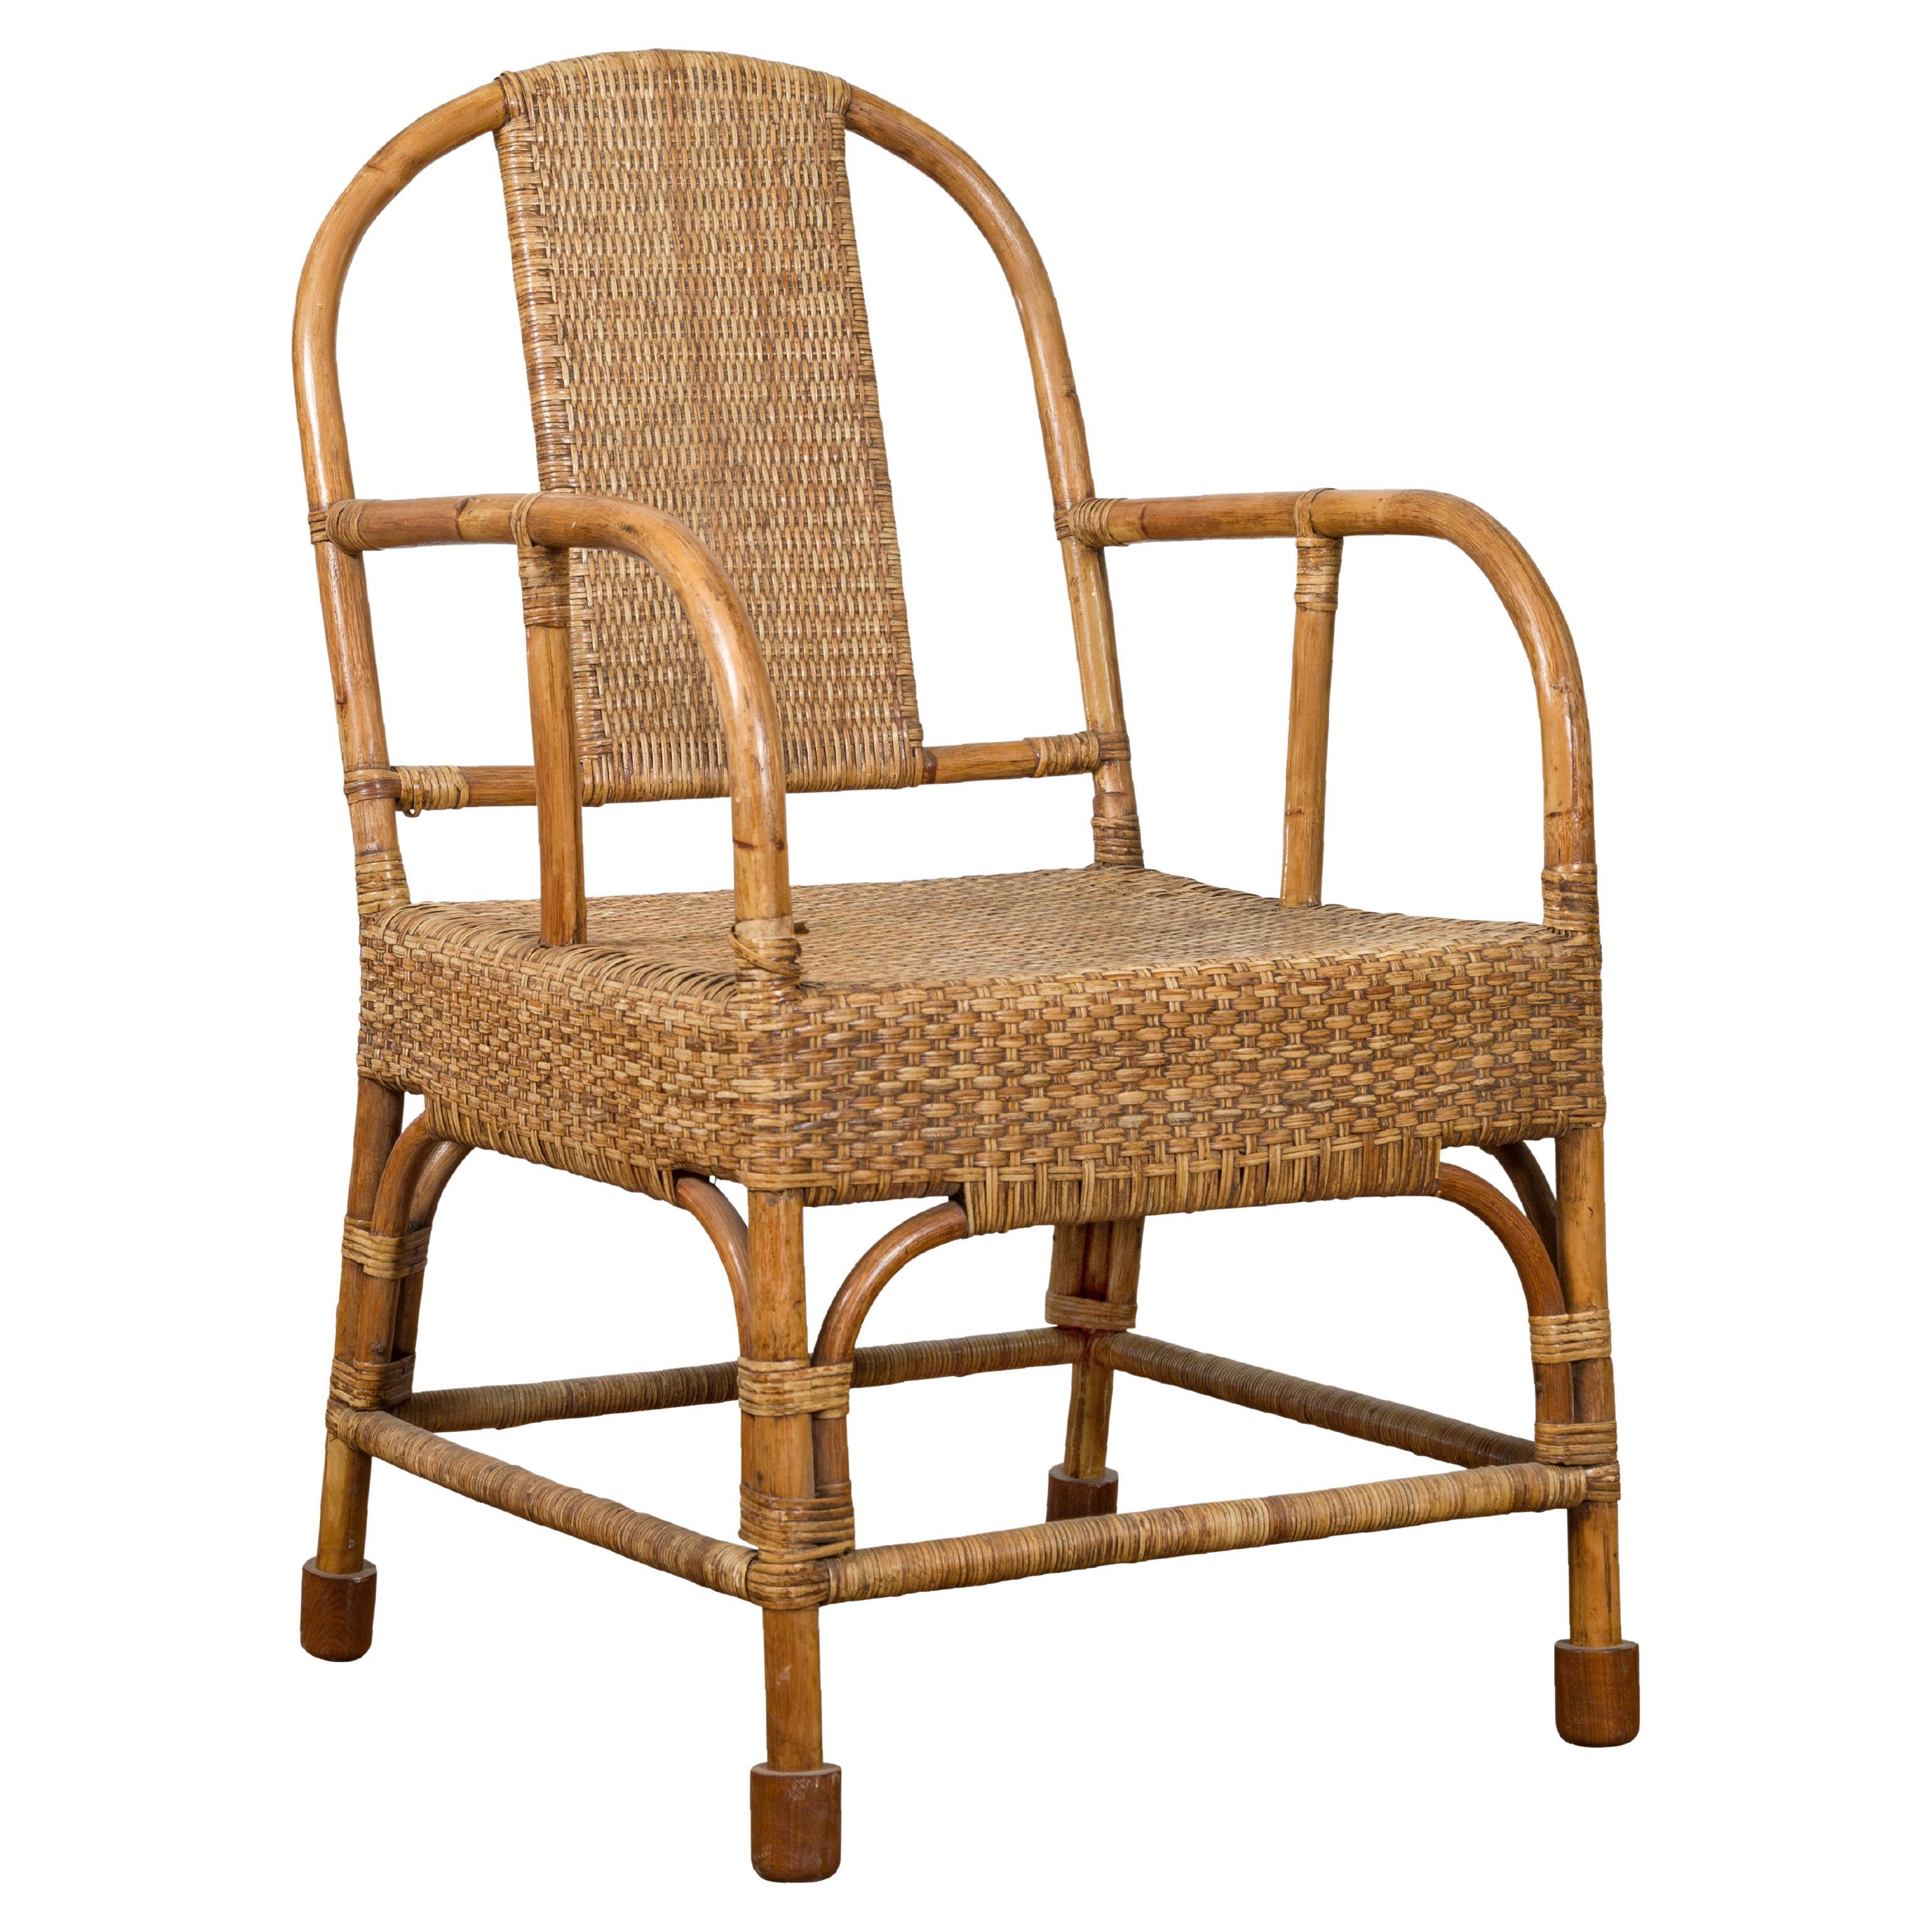 Vintage Burmese Country Style Hand-Woven Rattan Armchair with Rounded Back